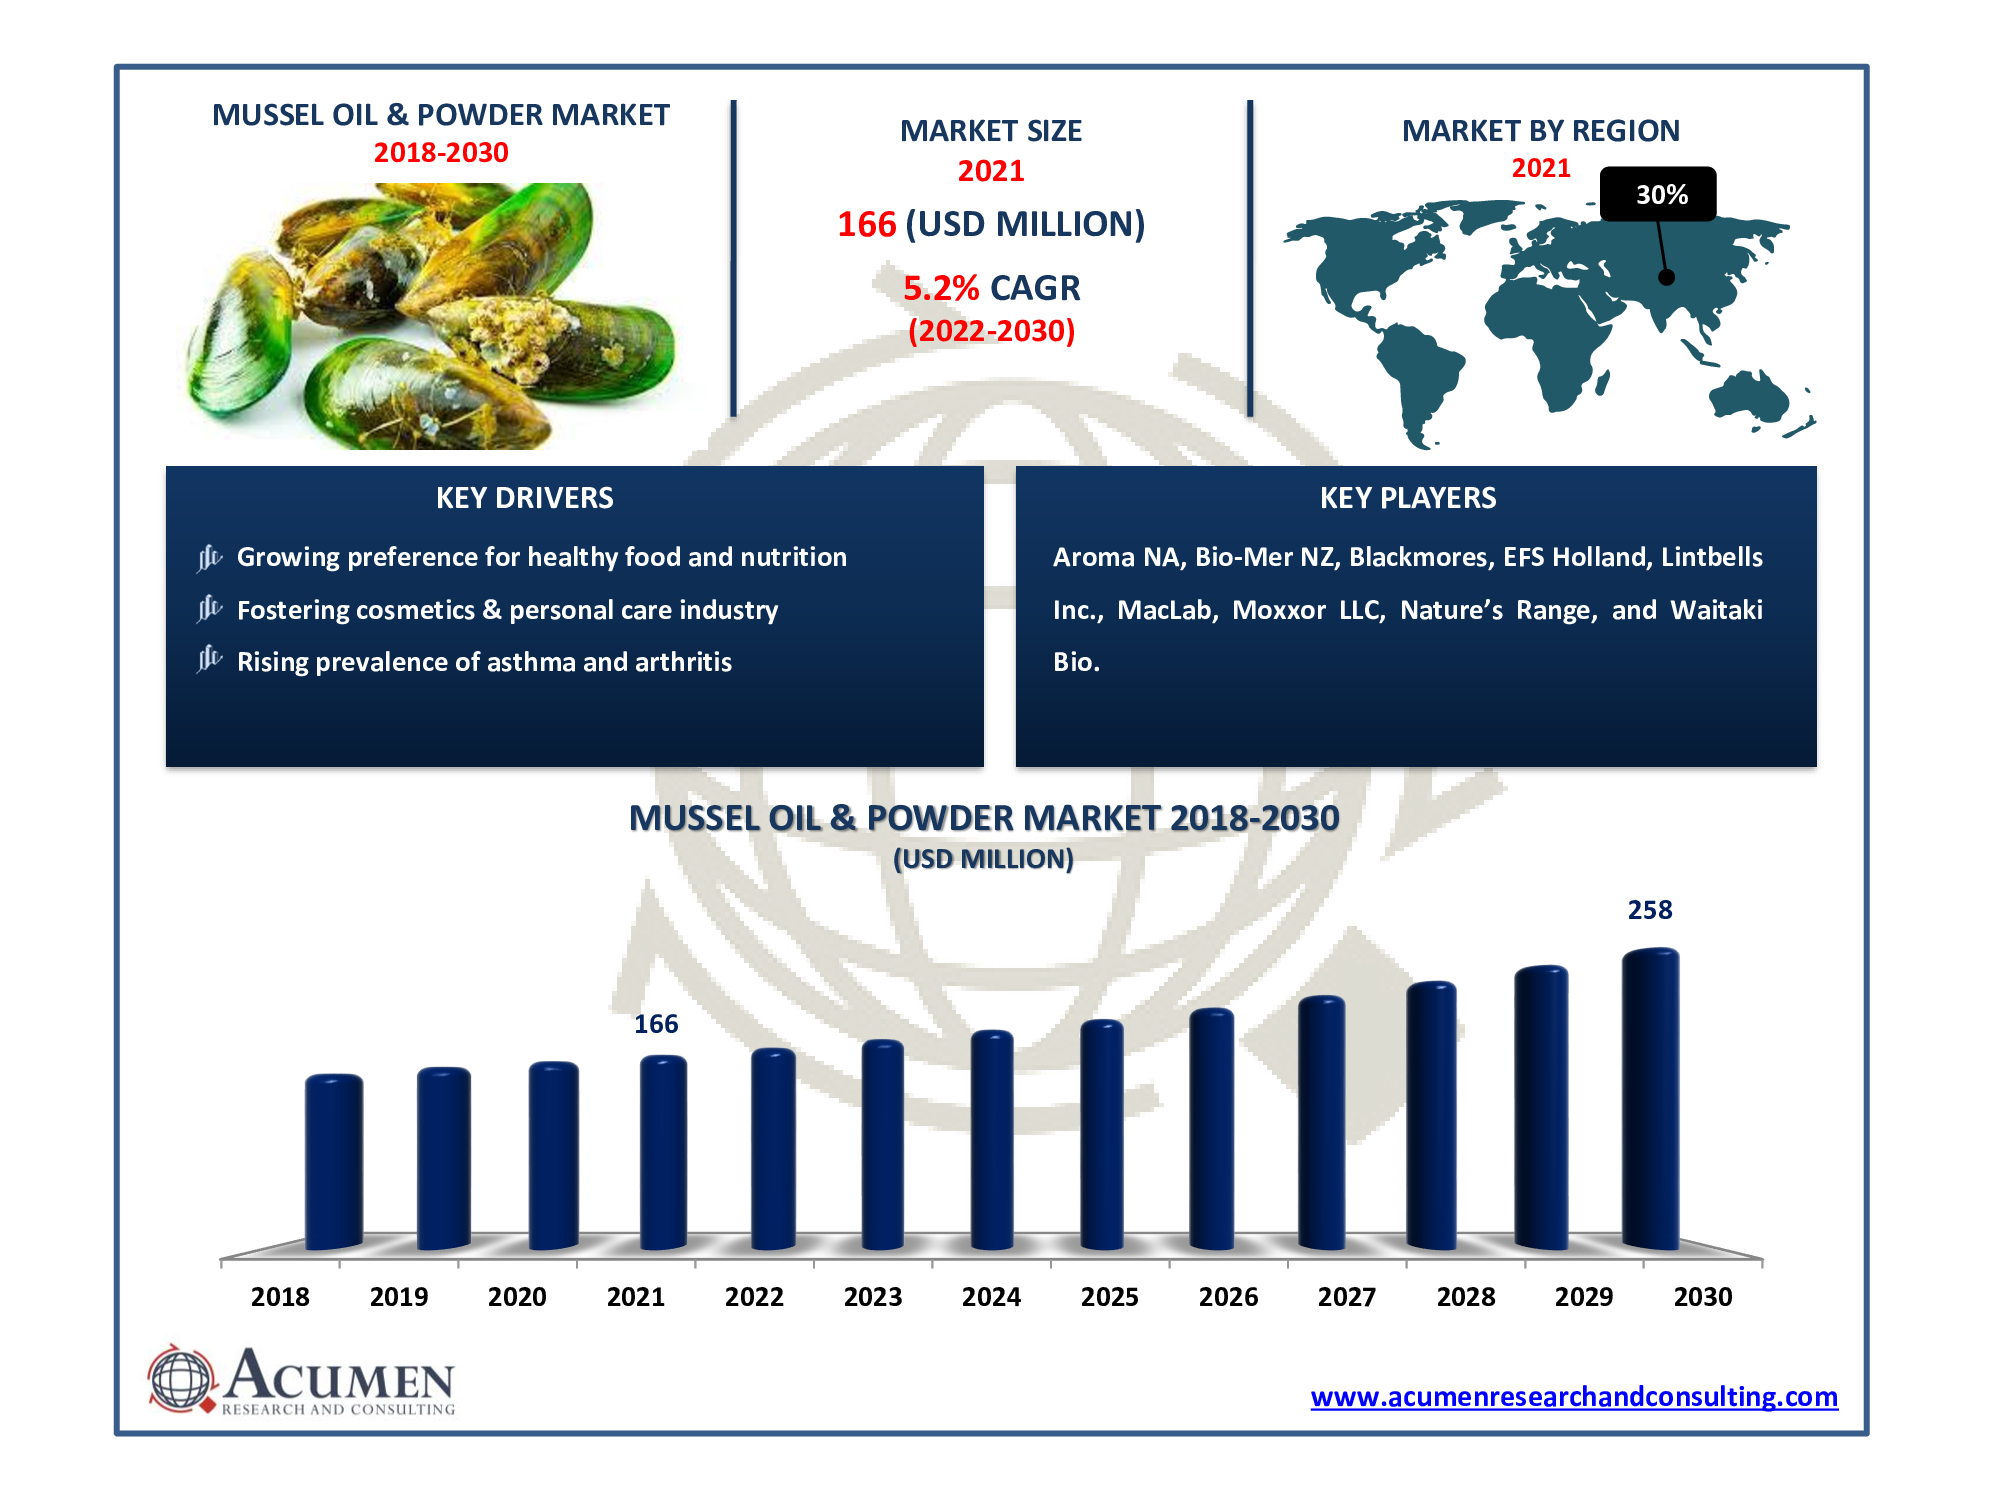 Mussel Oil & Powder Market size accounted for USD 166 Million in 2021 and is estimated to reach USD 258 Million by 2030.